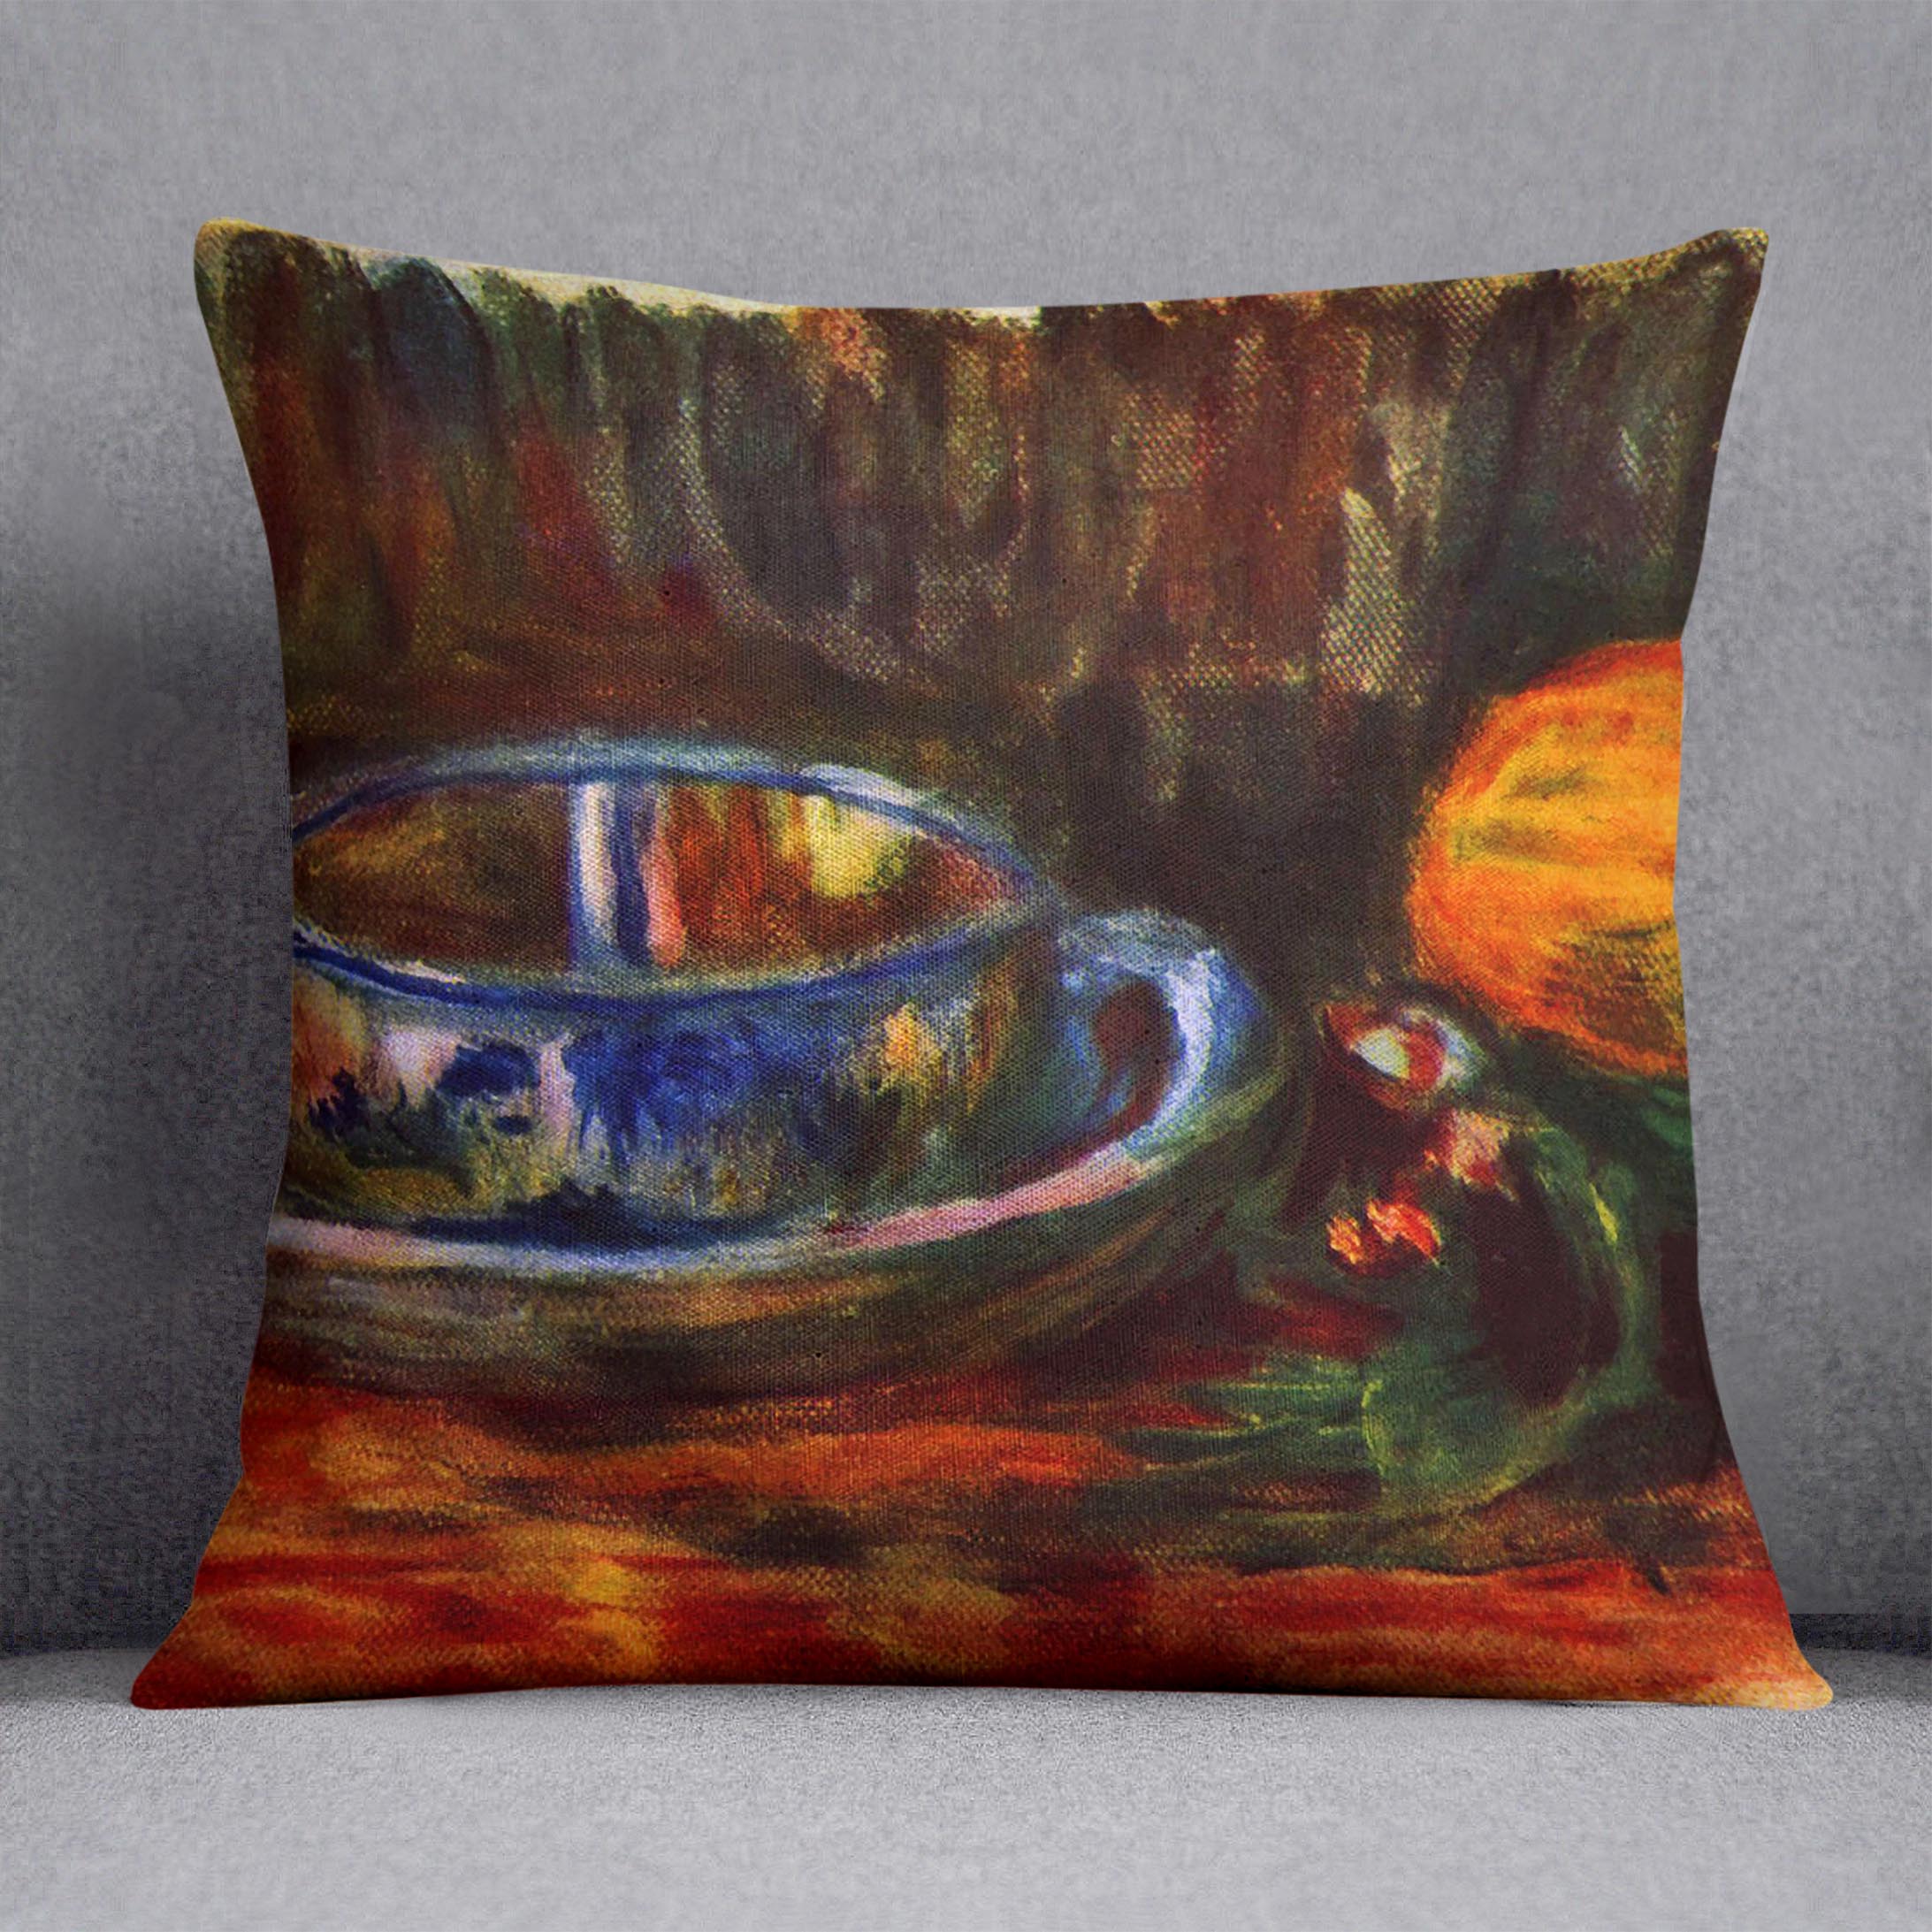 Still life with cup by Renoir Cushion